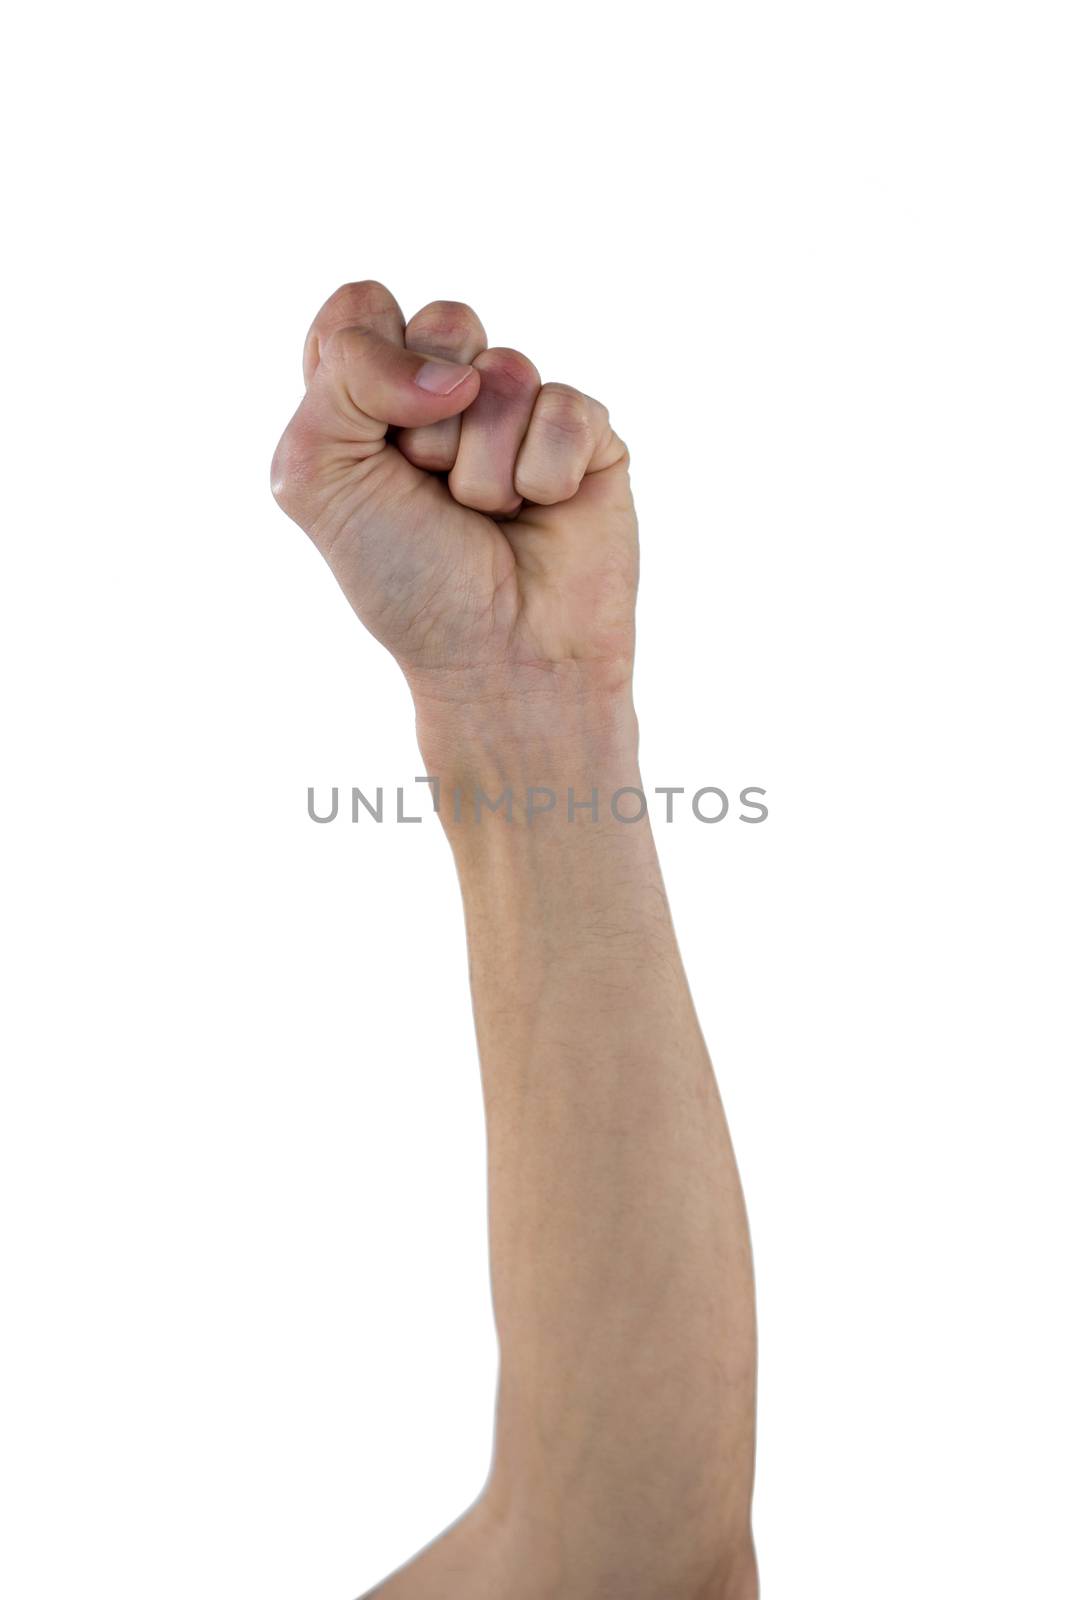 Hand with clenched fist against white background